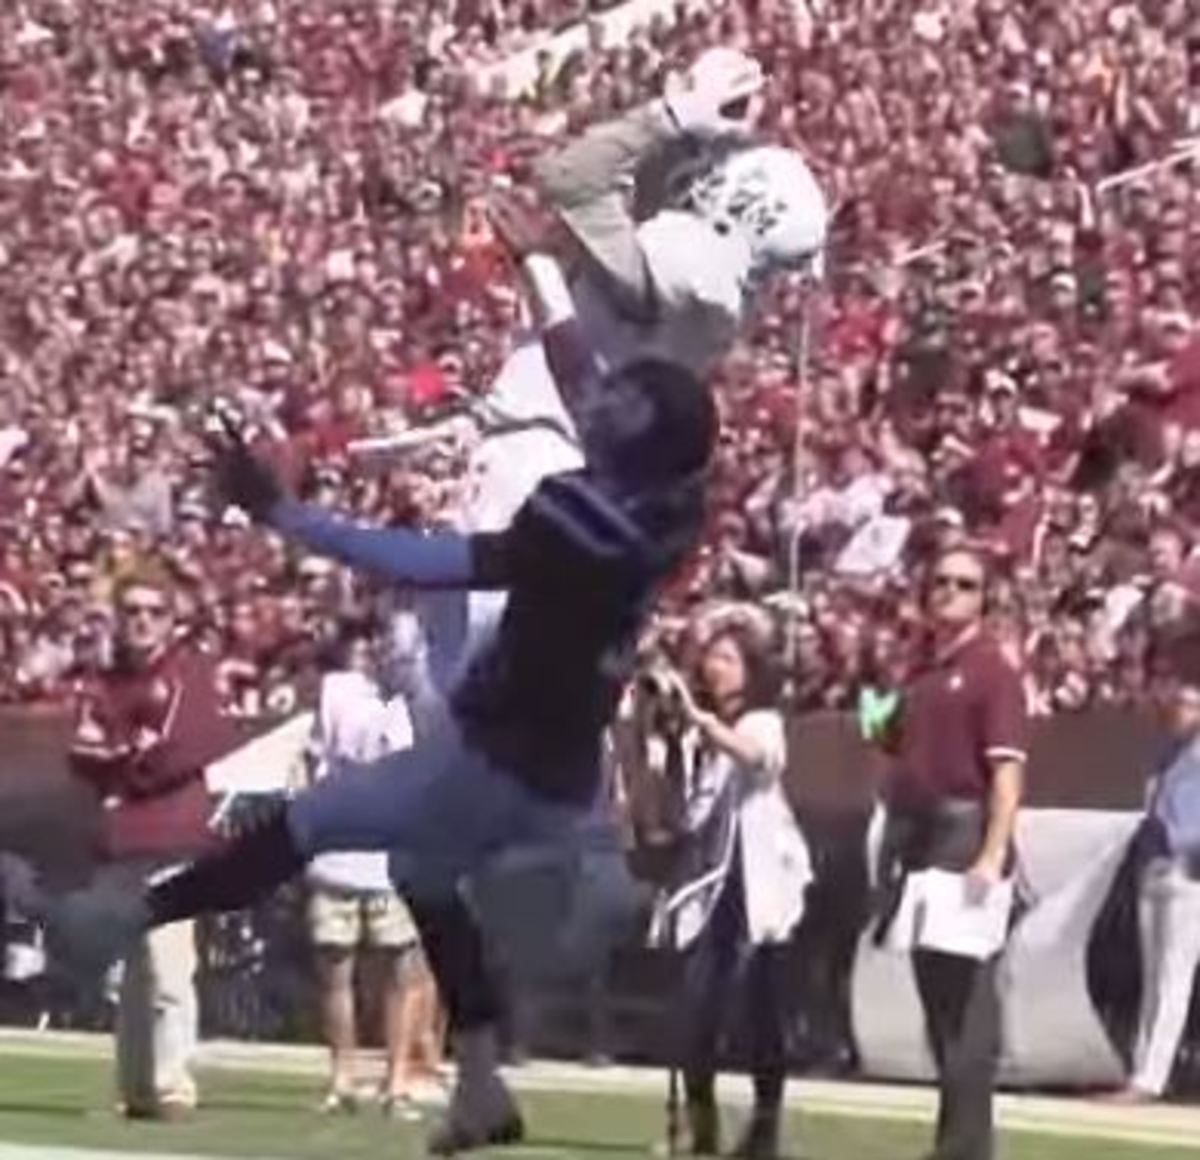 Texas A&M player makes a difficult catch.